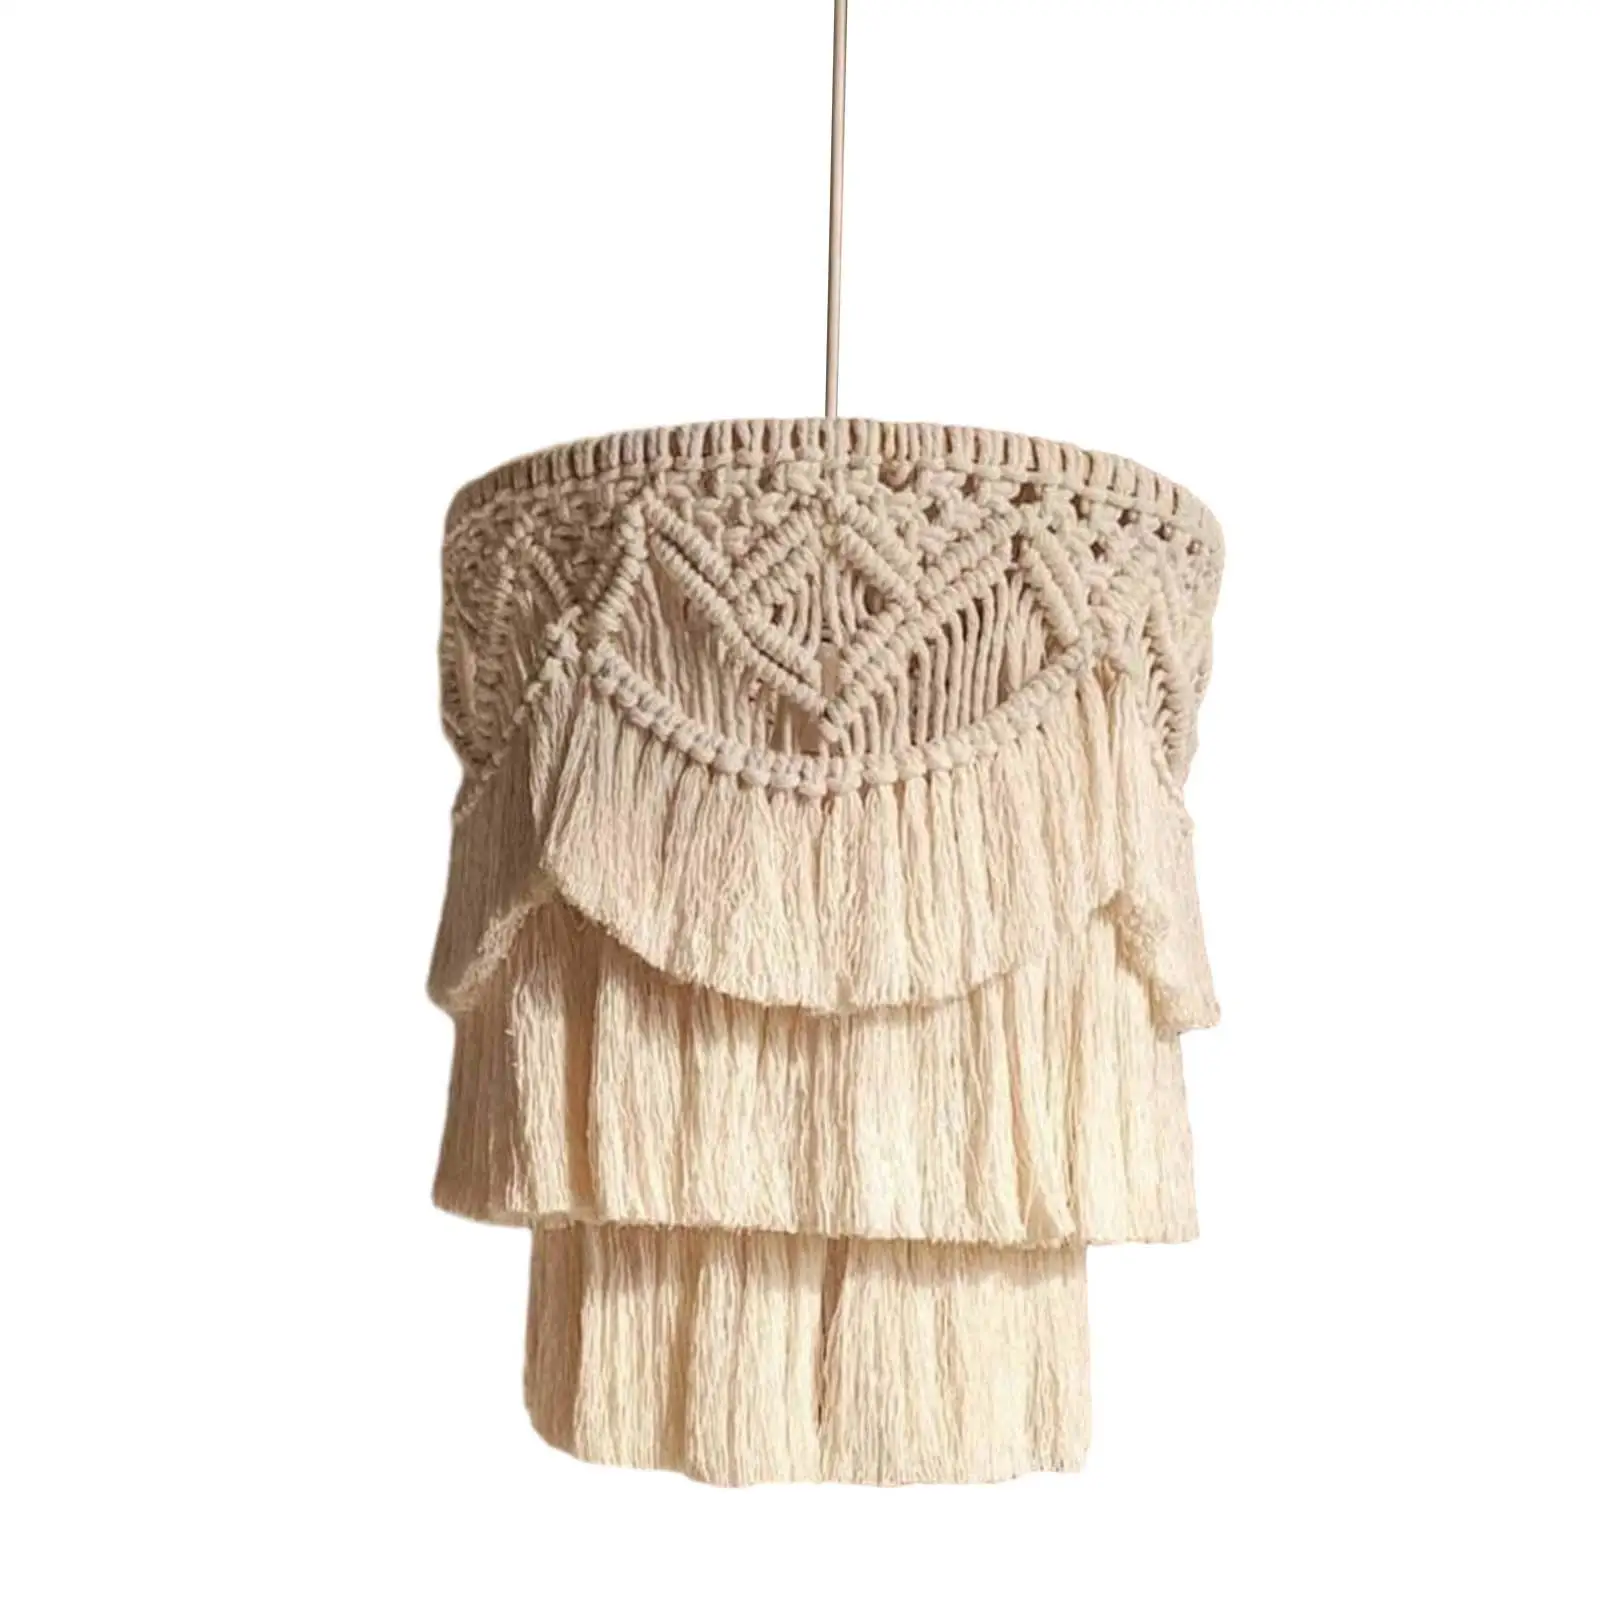 Macrame Lamp Shade Handwoven Durable Rustic Pendant Light Cover for Housewarming Gift Apartment Dining Room Office Restaurant